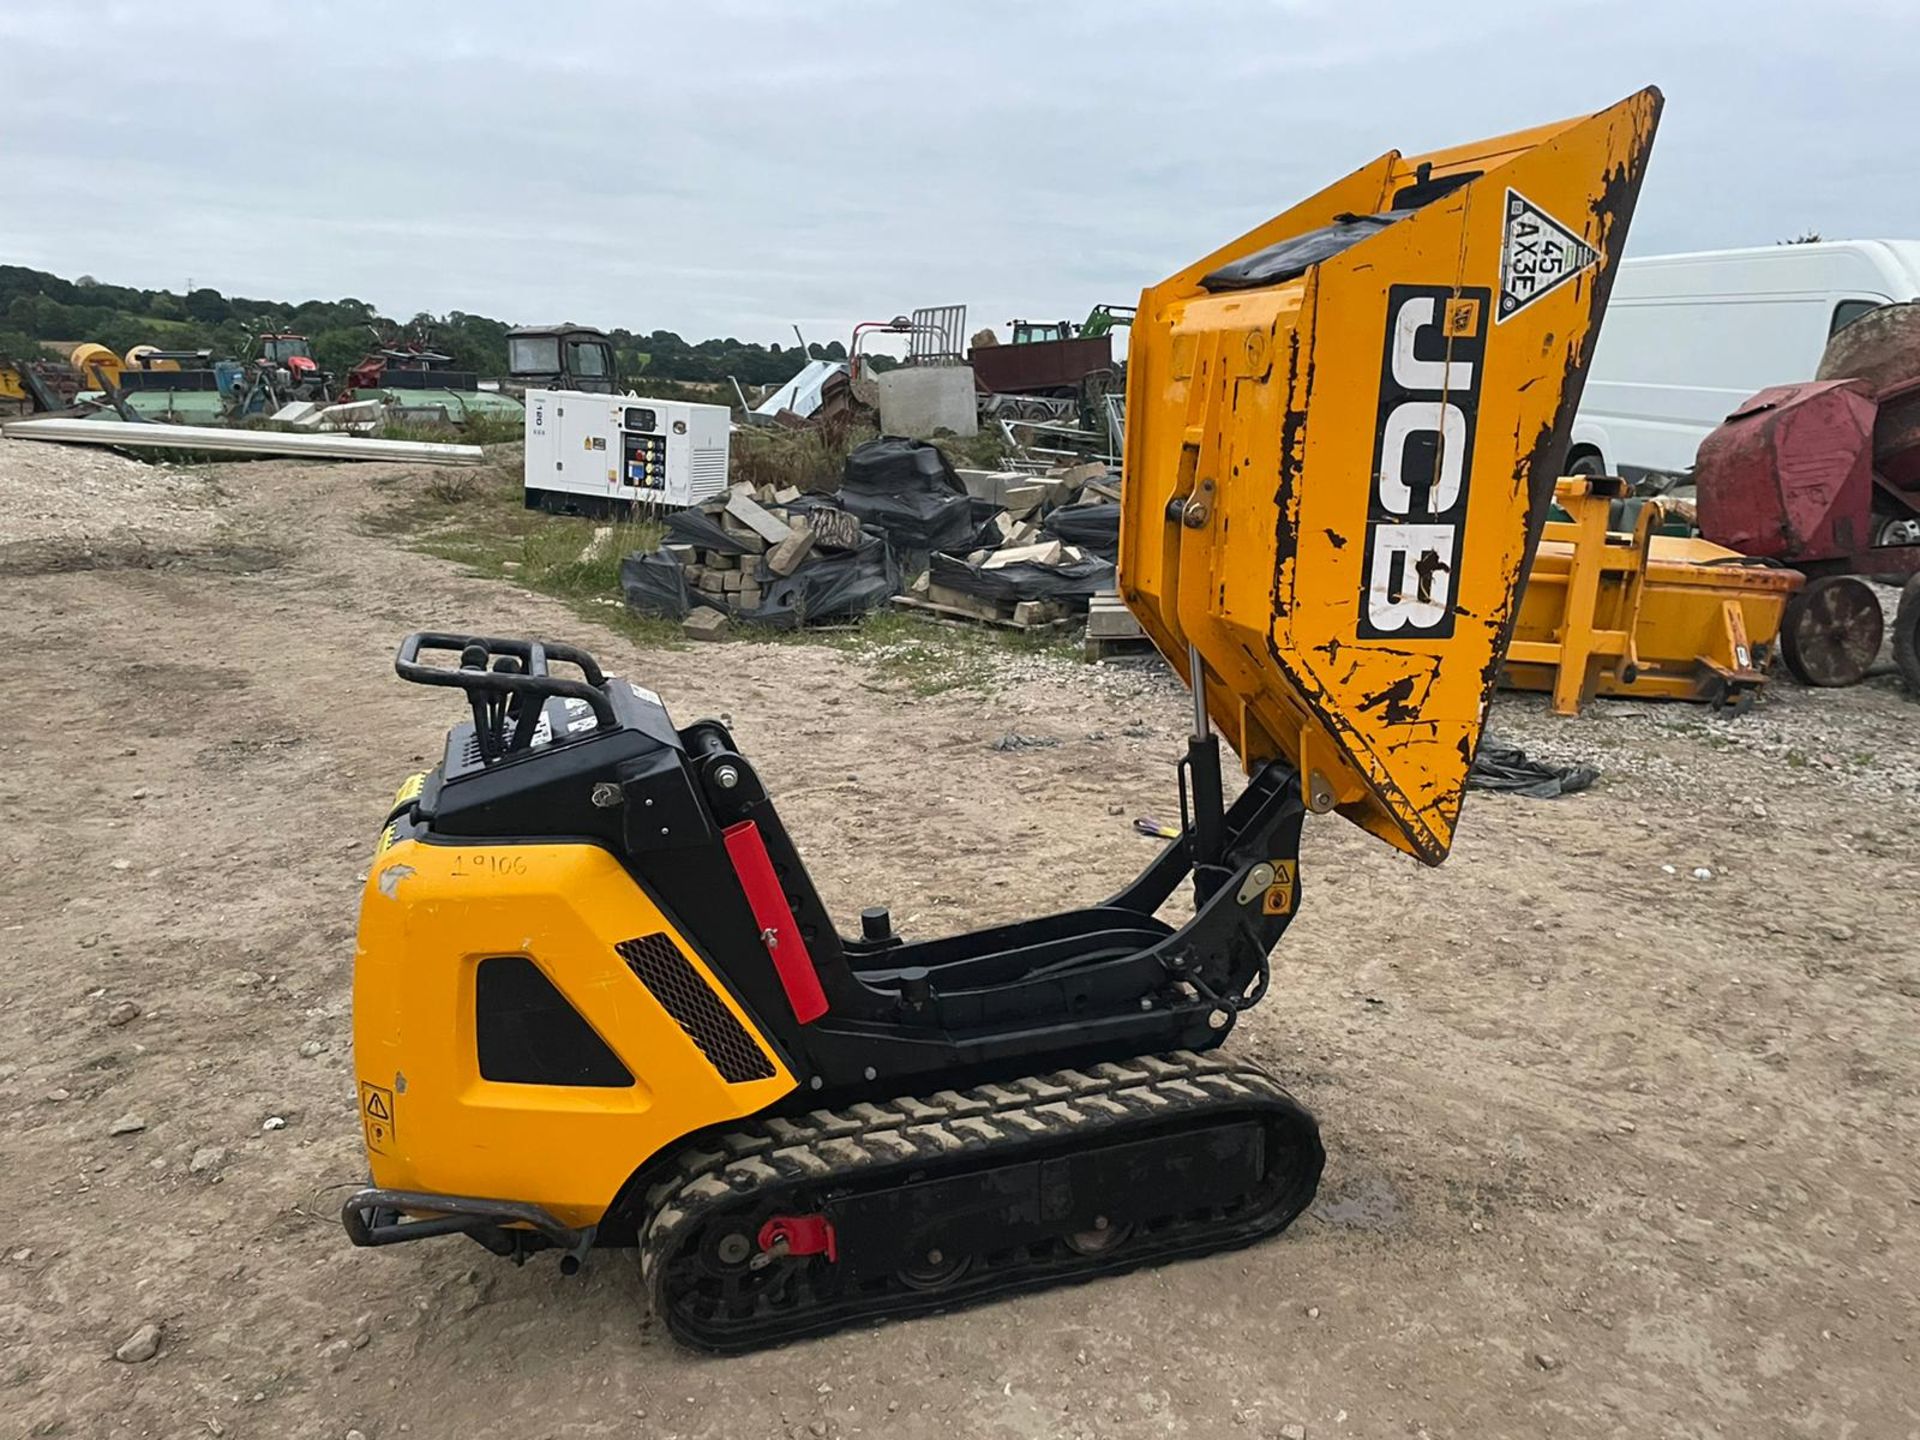 2019 JCB HTD-5 DIESEL TRACKED DUMPER, RUNS DRIVES AND DUMPS, 2 SPEED TRACKING, ELECTRIC START - Image 4 of 13